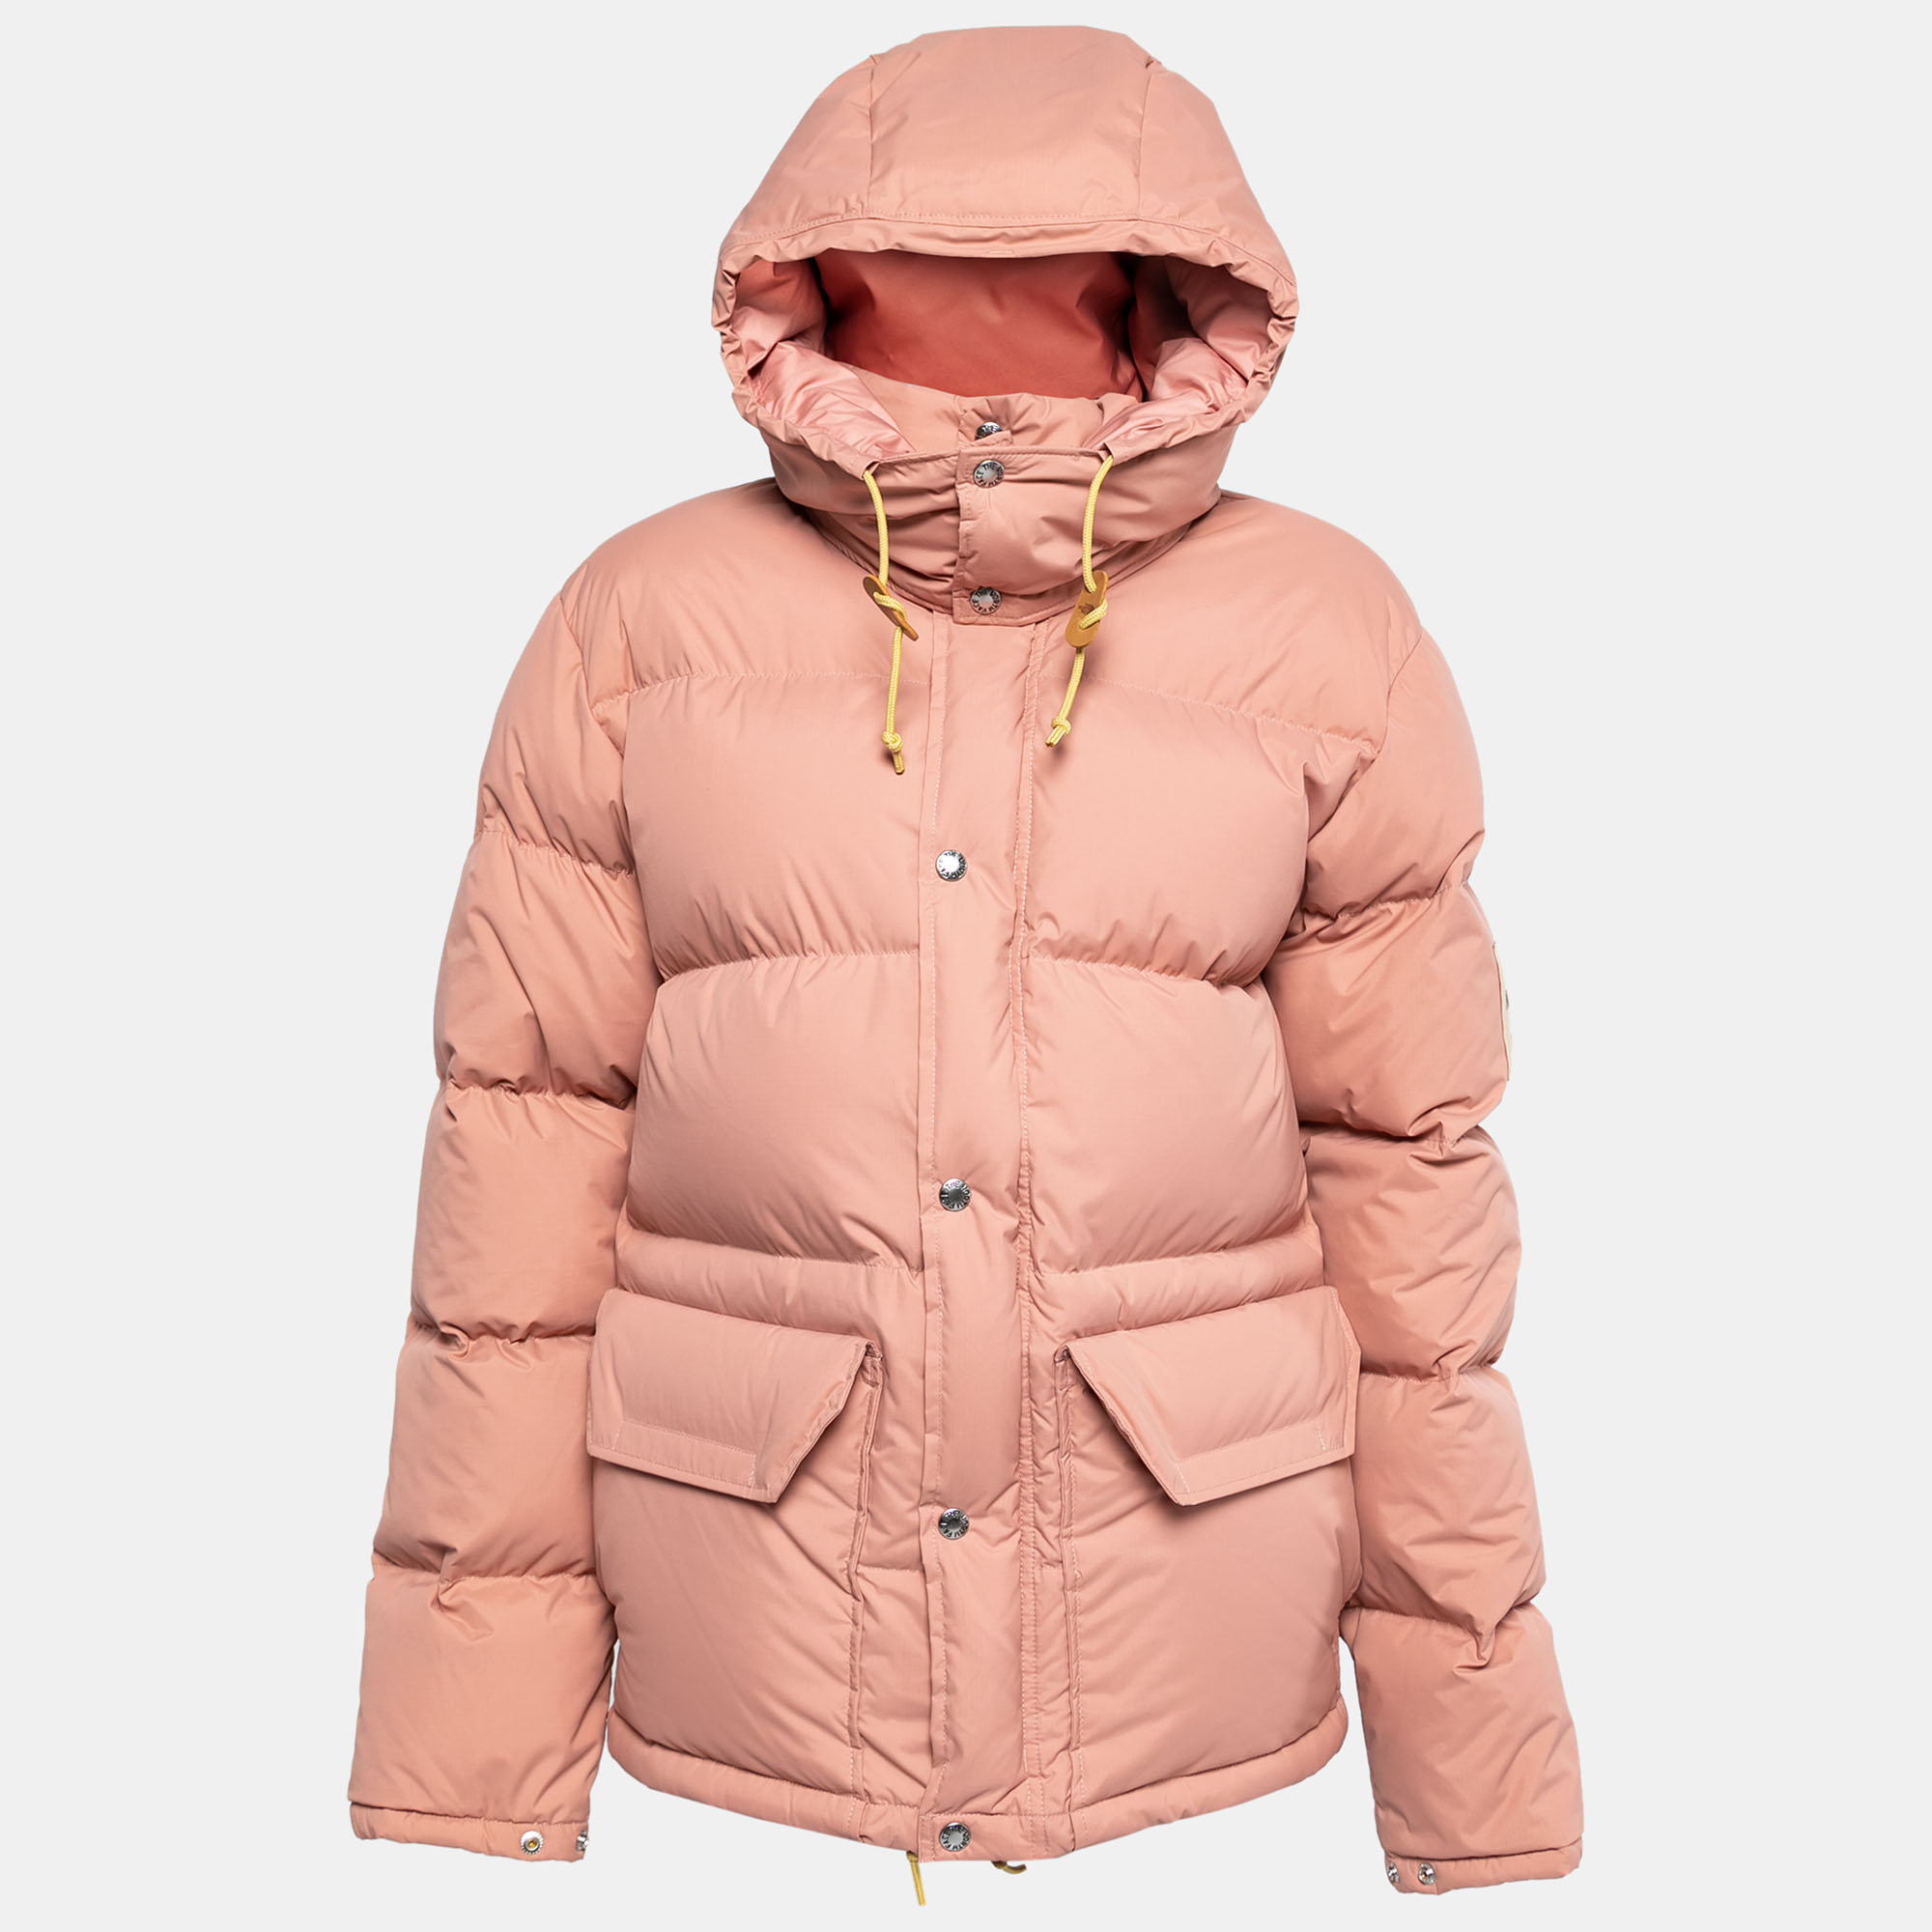 North face x gucci light pink down jacket s